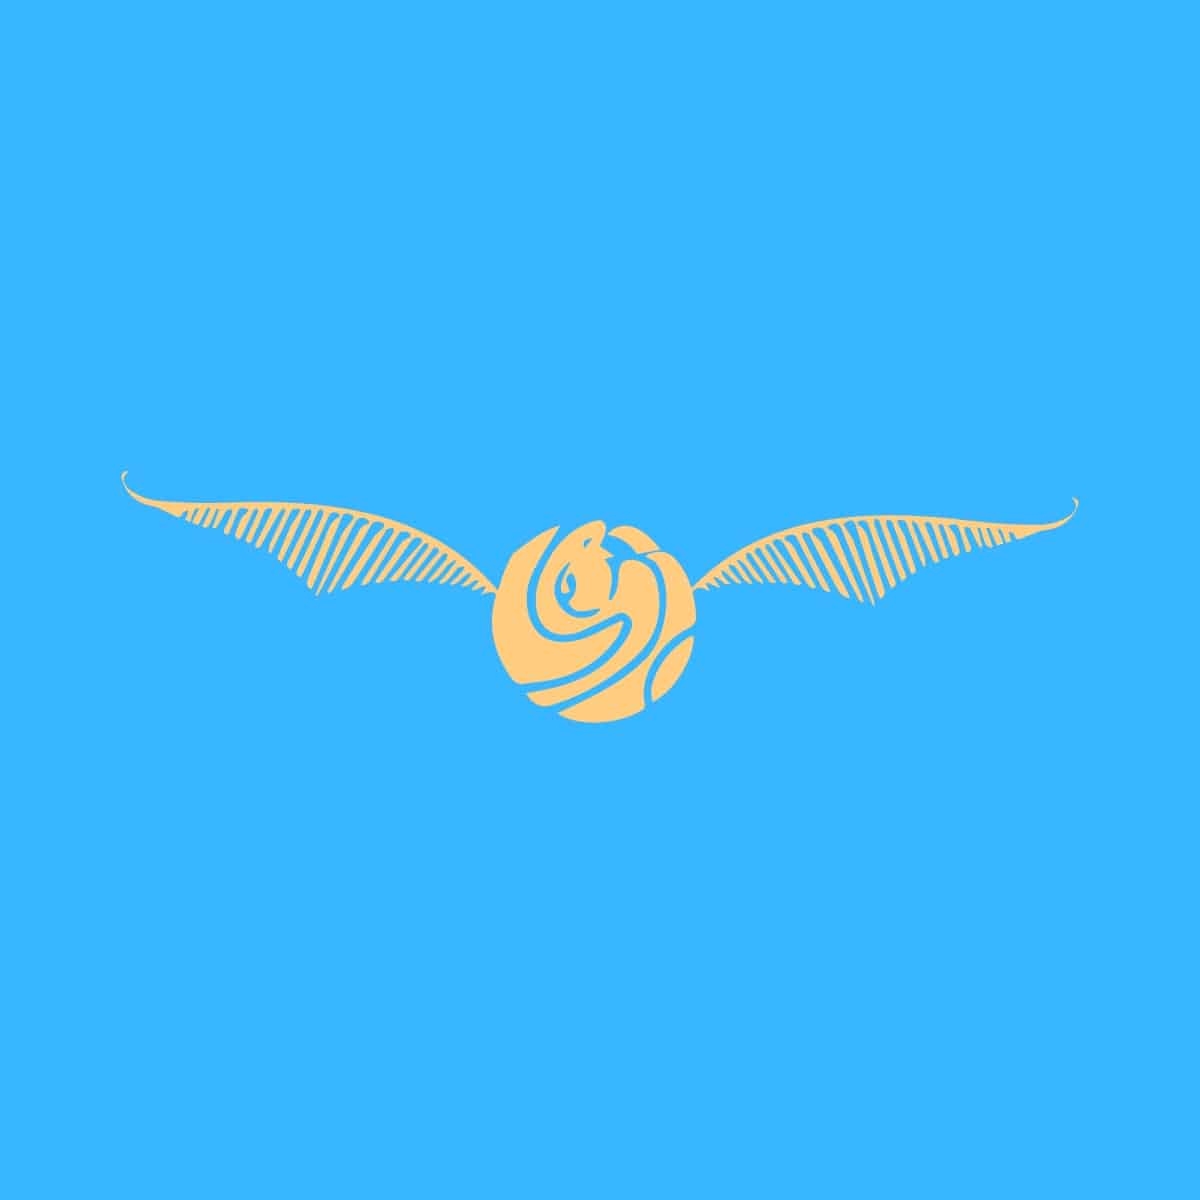 Cartoon graphic of a Harry Potter golden snitch on a blue background.